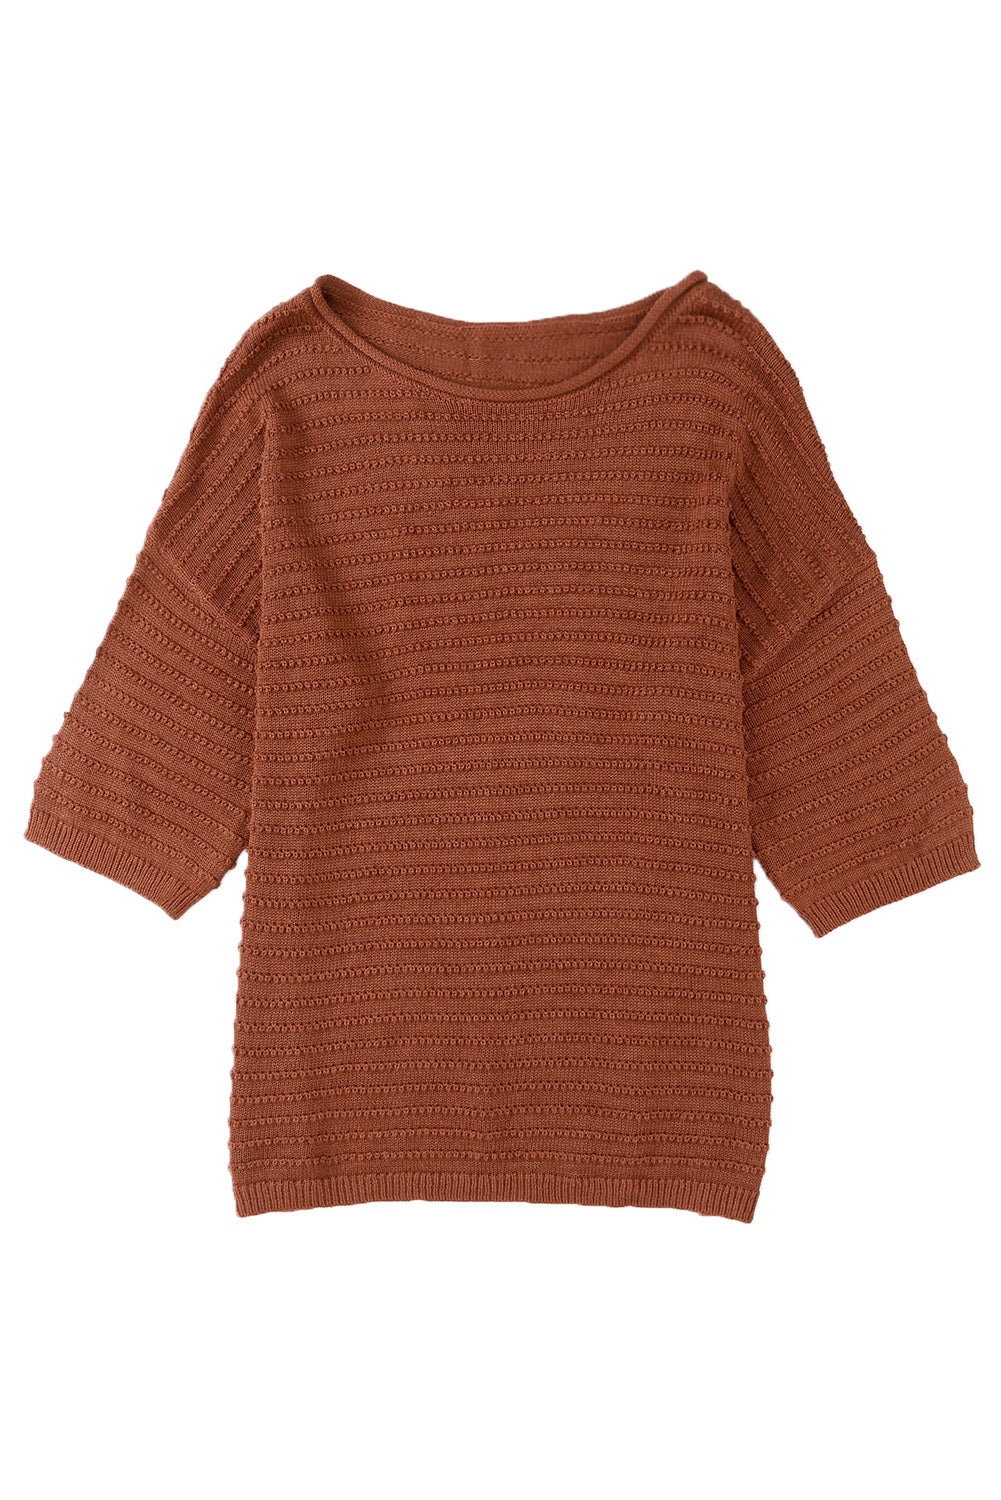 Apricot Casual Solid Rib-Knit Short Sleeve Top